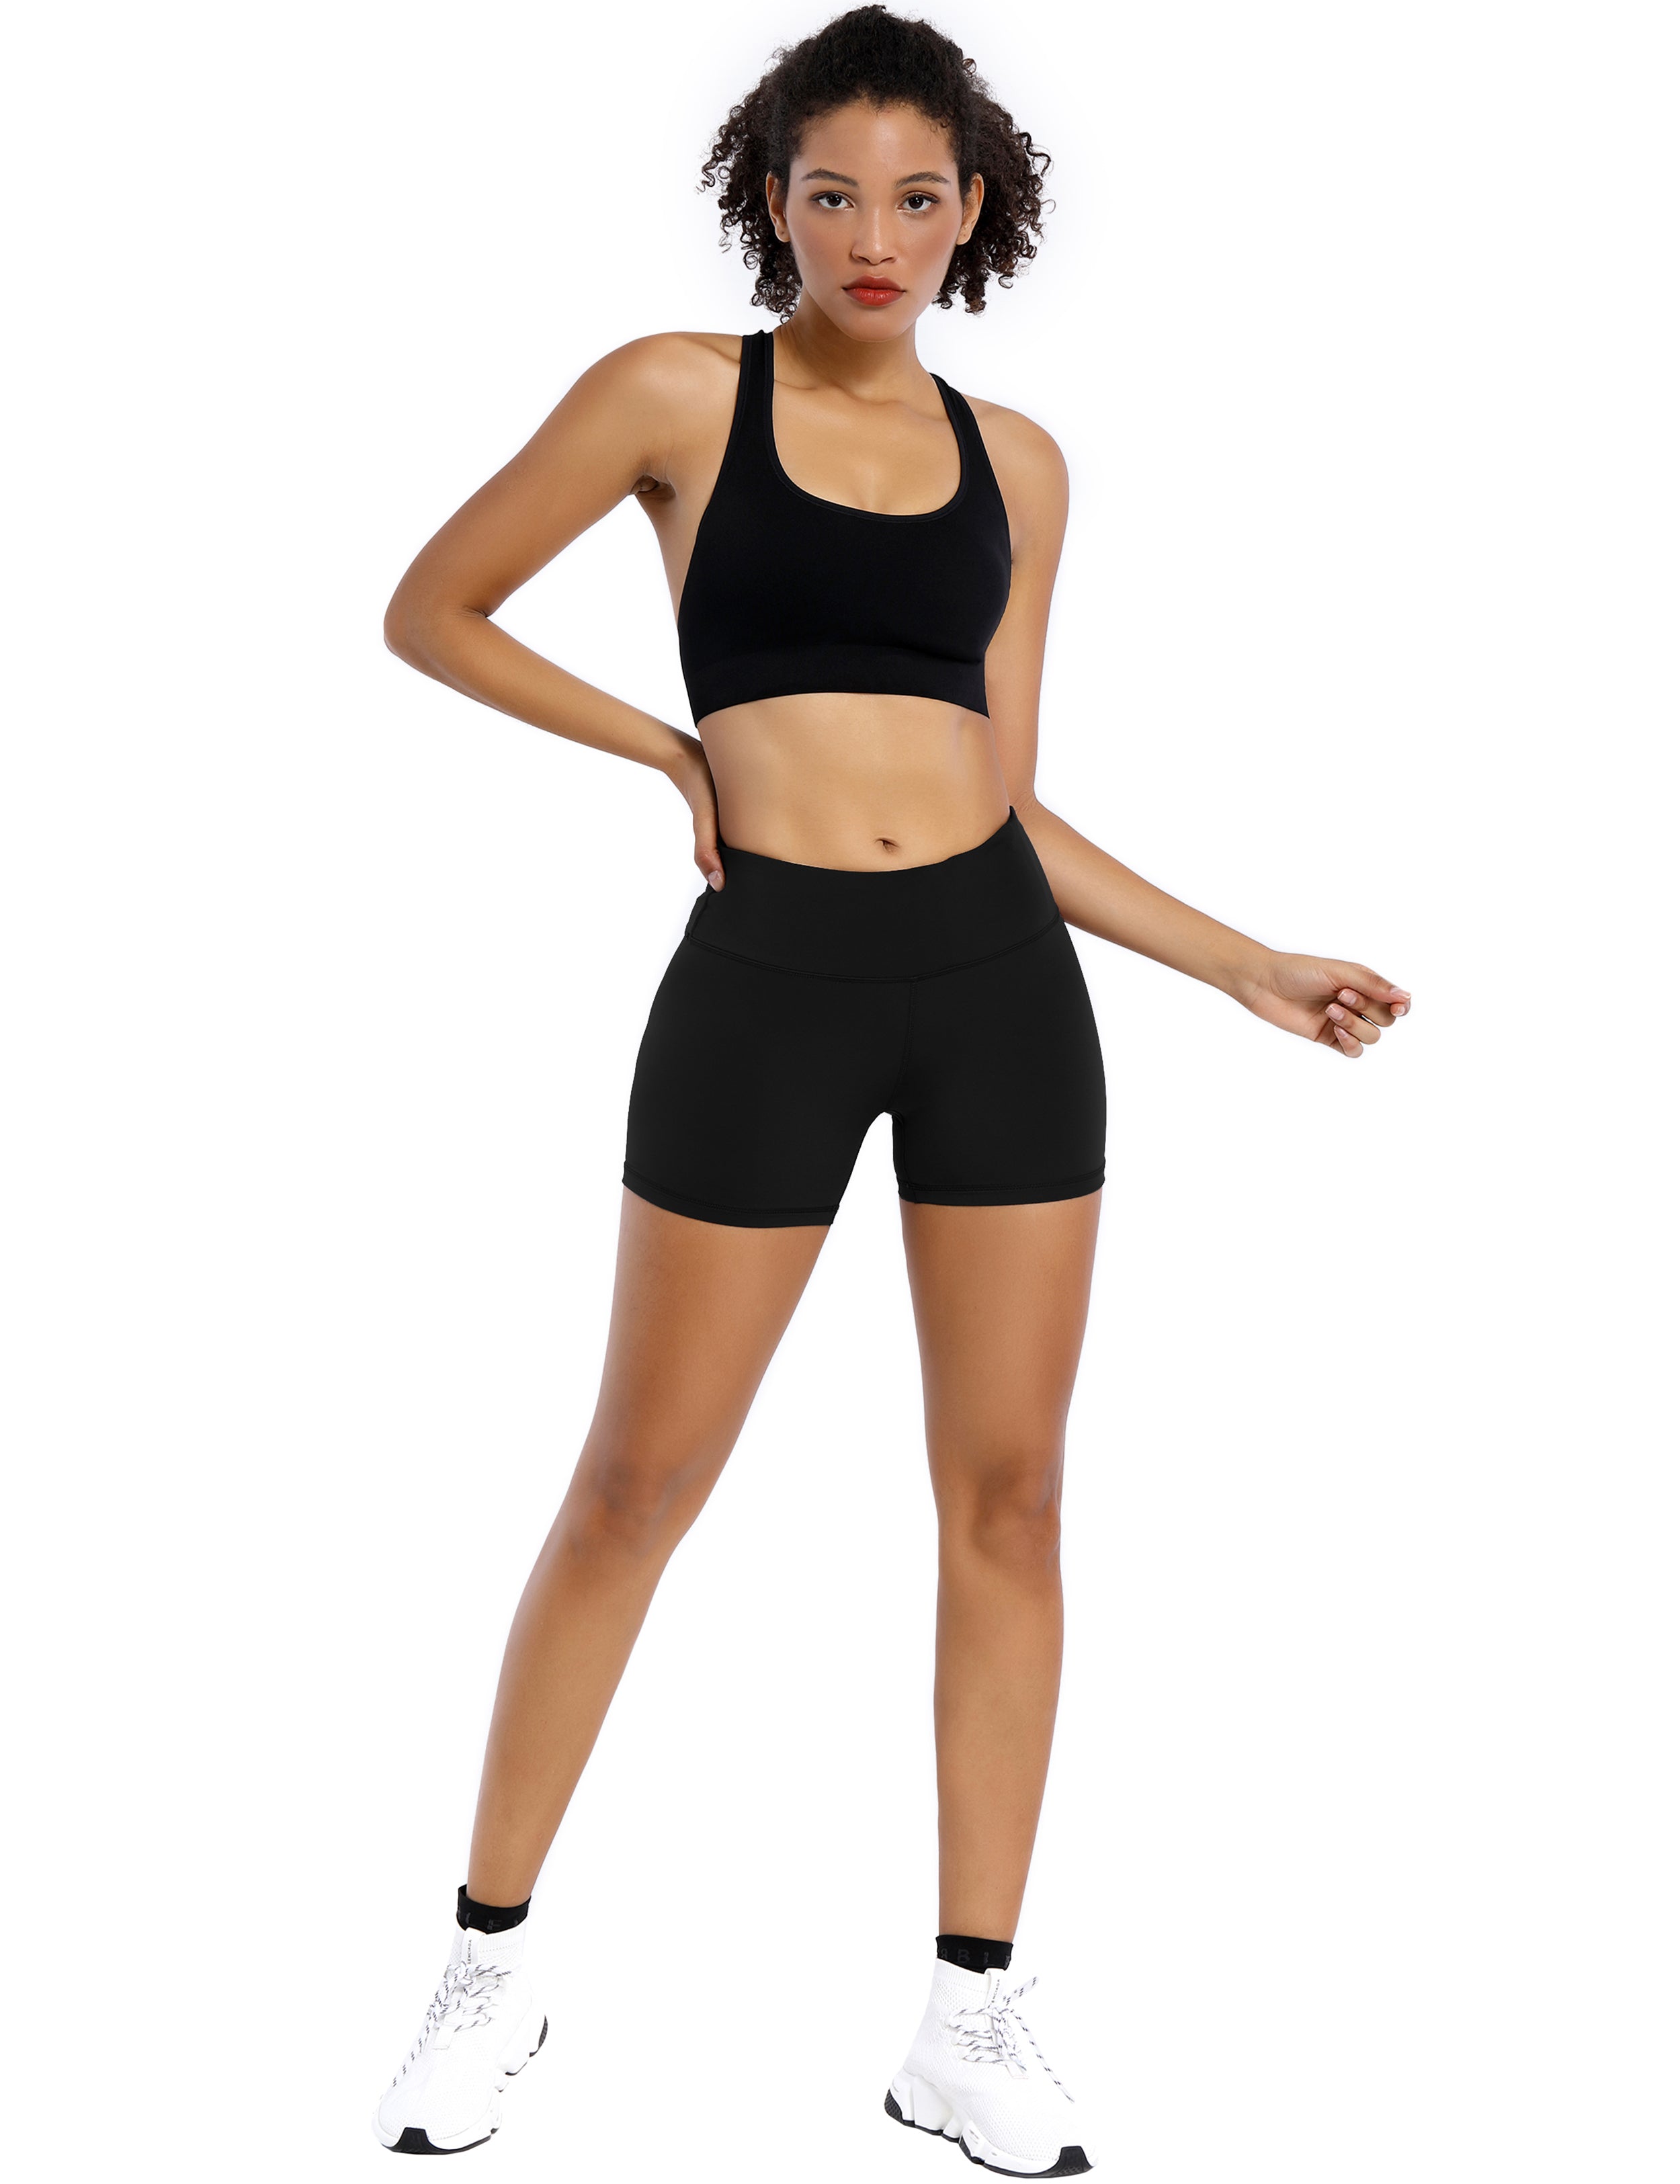 4" Yoga Shorts black Sleek, soft, smooth and totally comfortable: our newest style is here. Softest-ever fabric High elasticity High density 4-way stretch Fabric doesn't attract lint easily No see-through Moisture-wicking Machine wash 75% Nylon, 25% Spandex